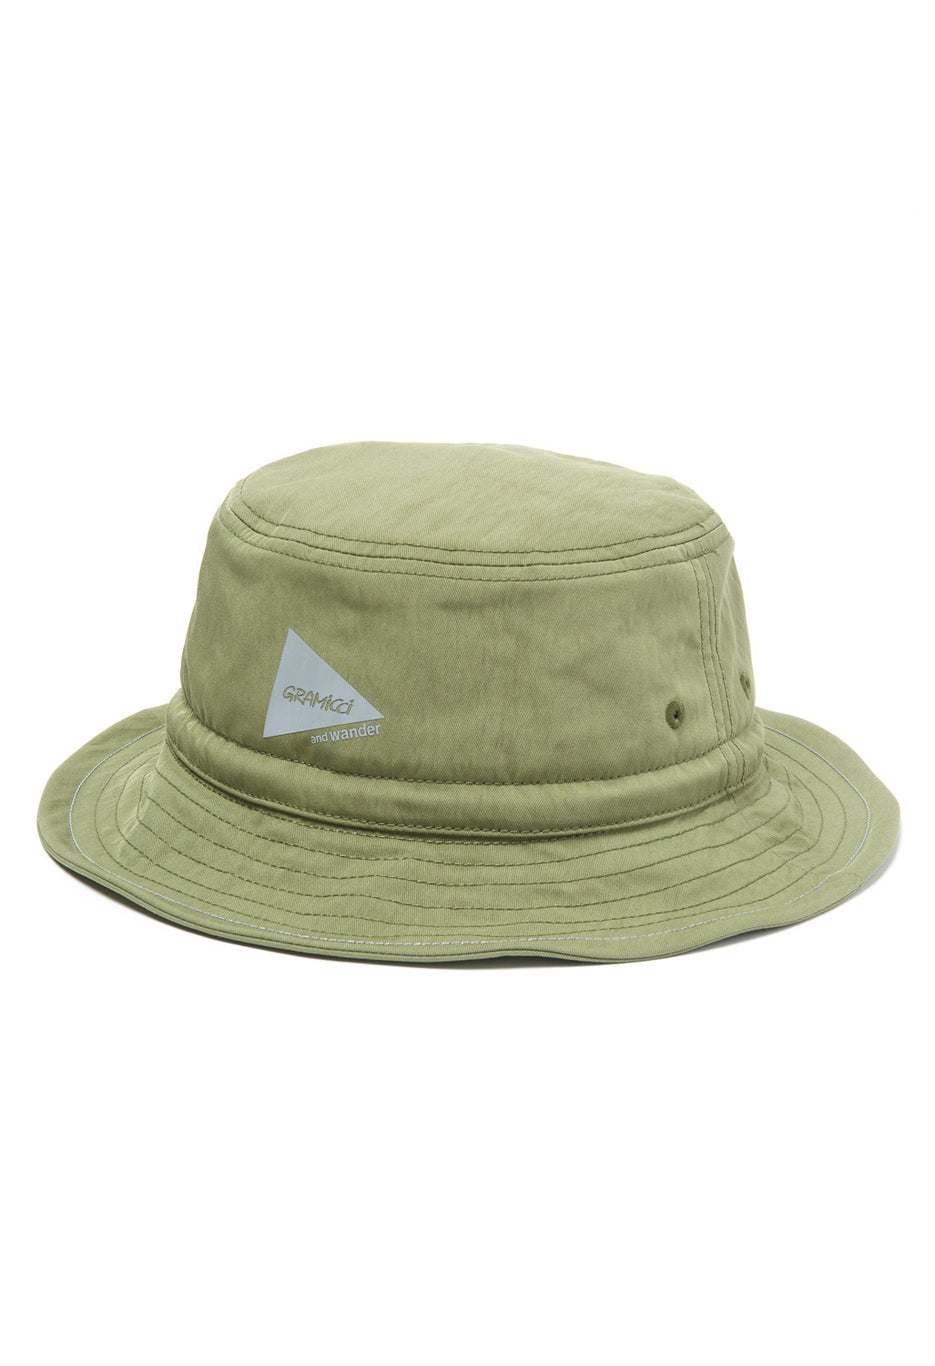 Gramicci x And Wander Nyco Hat - Olive